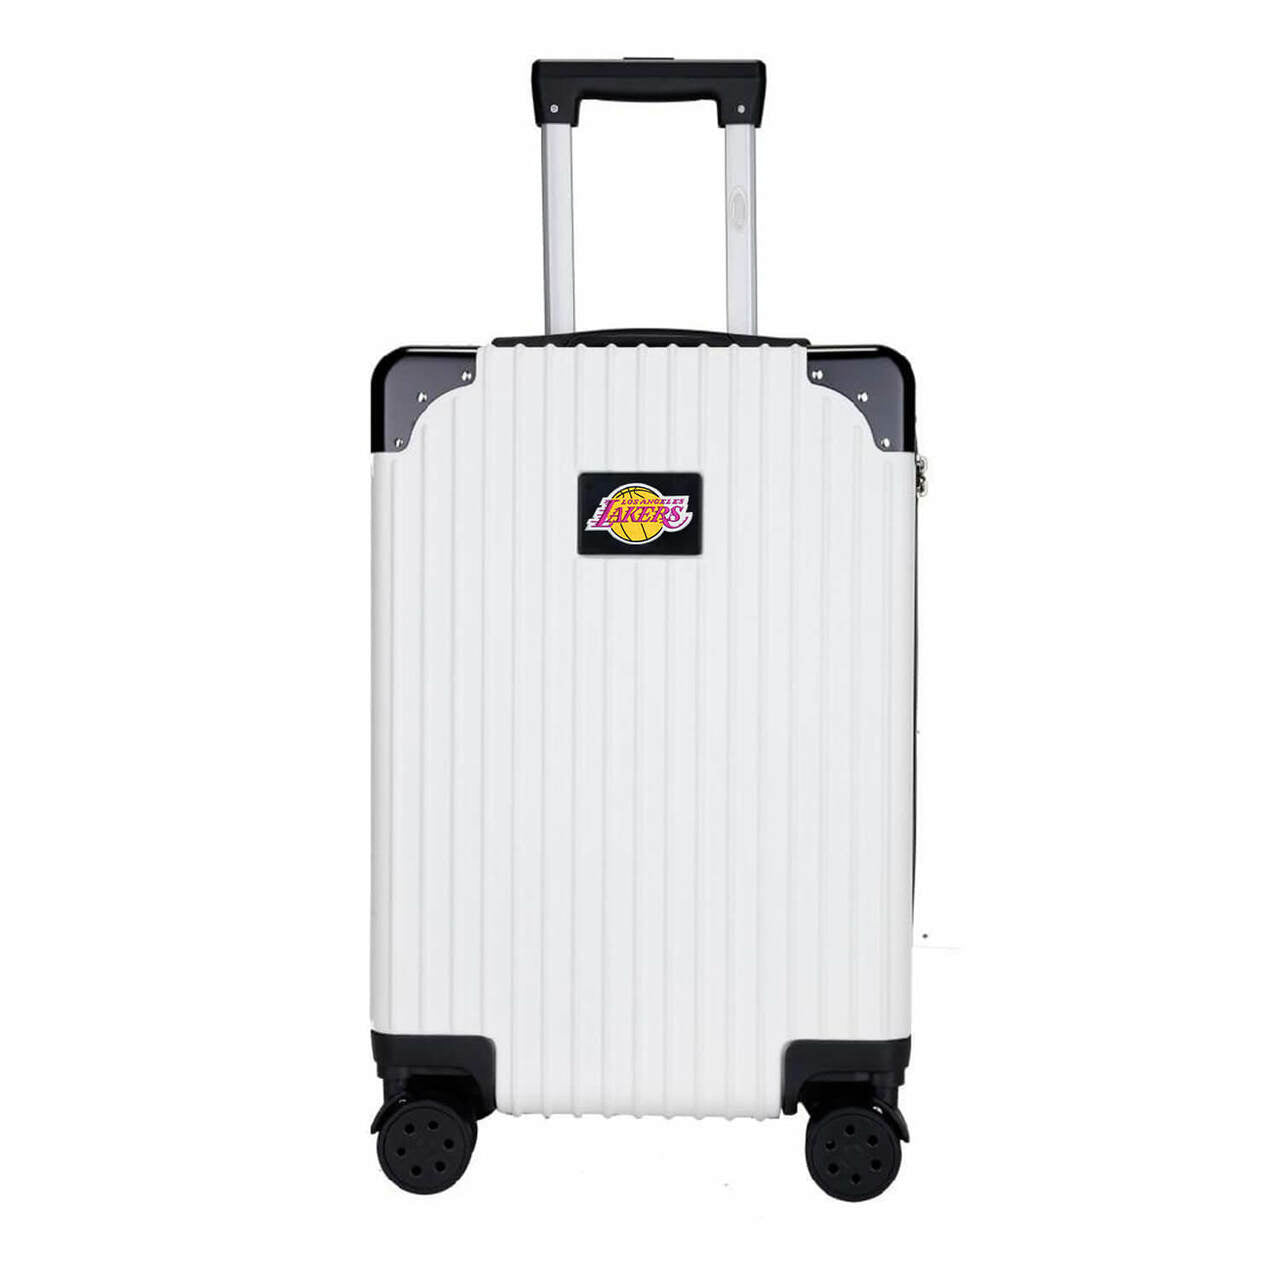 Los Angeles Lakers Premium 2-Toned 21" Carry-On Hardcase